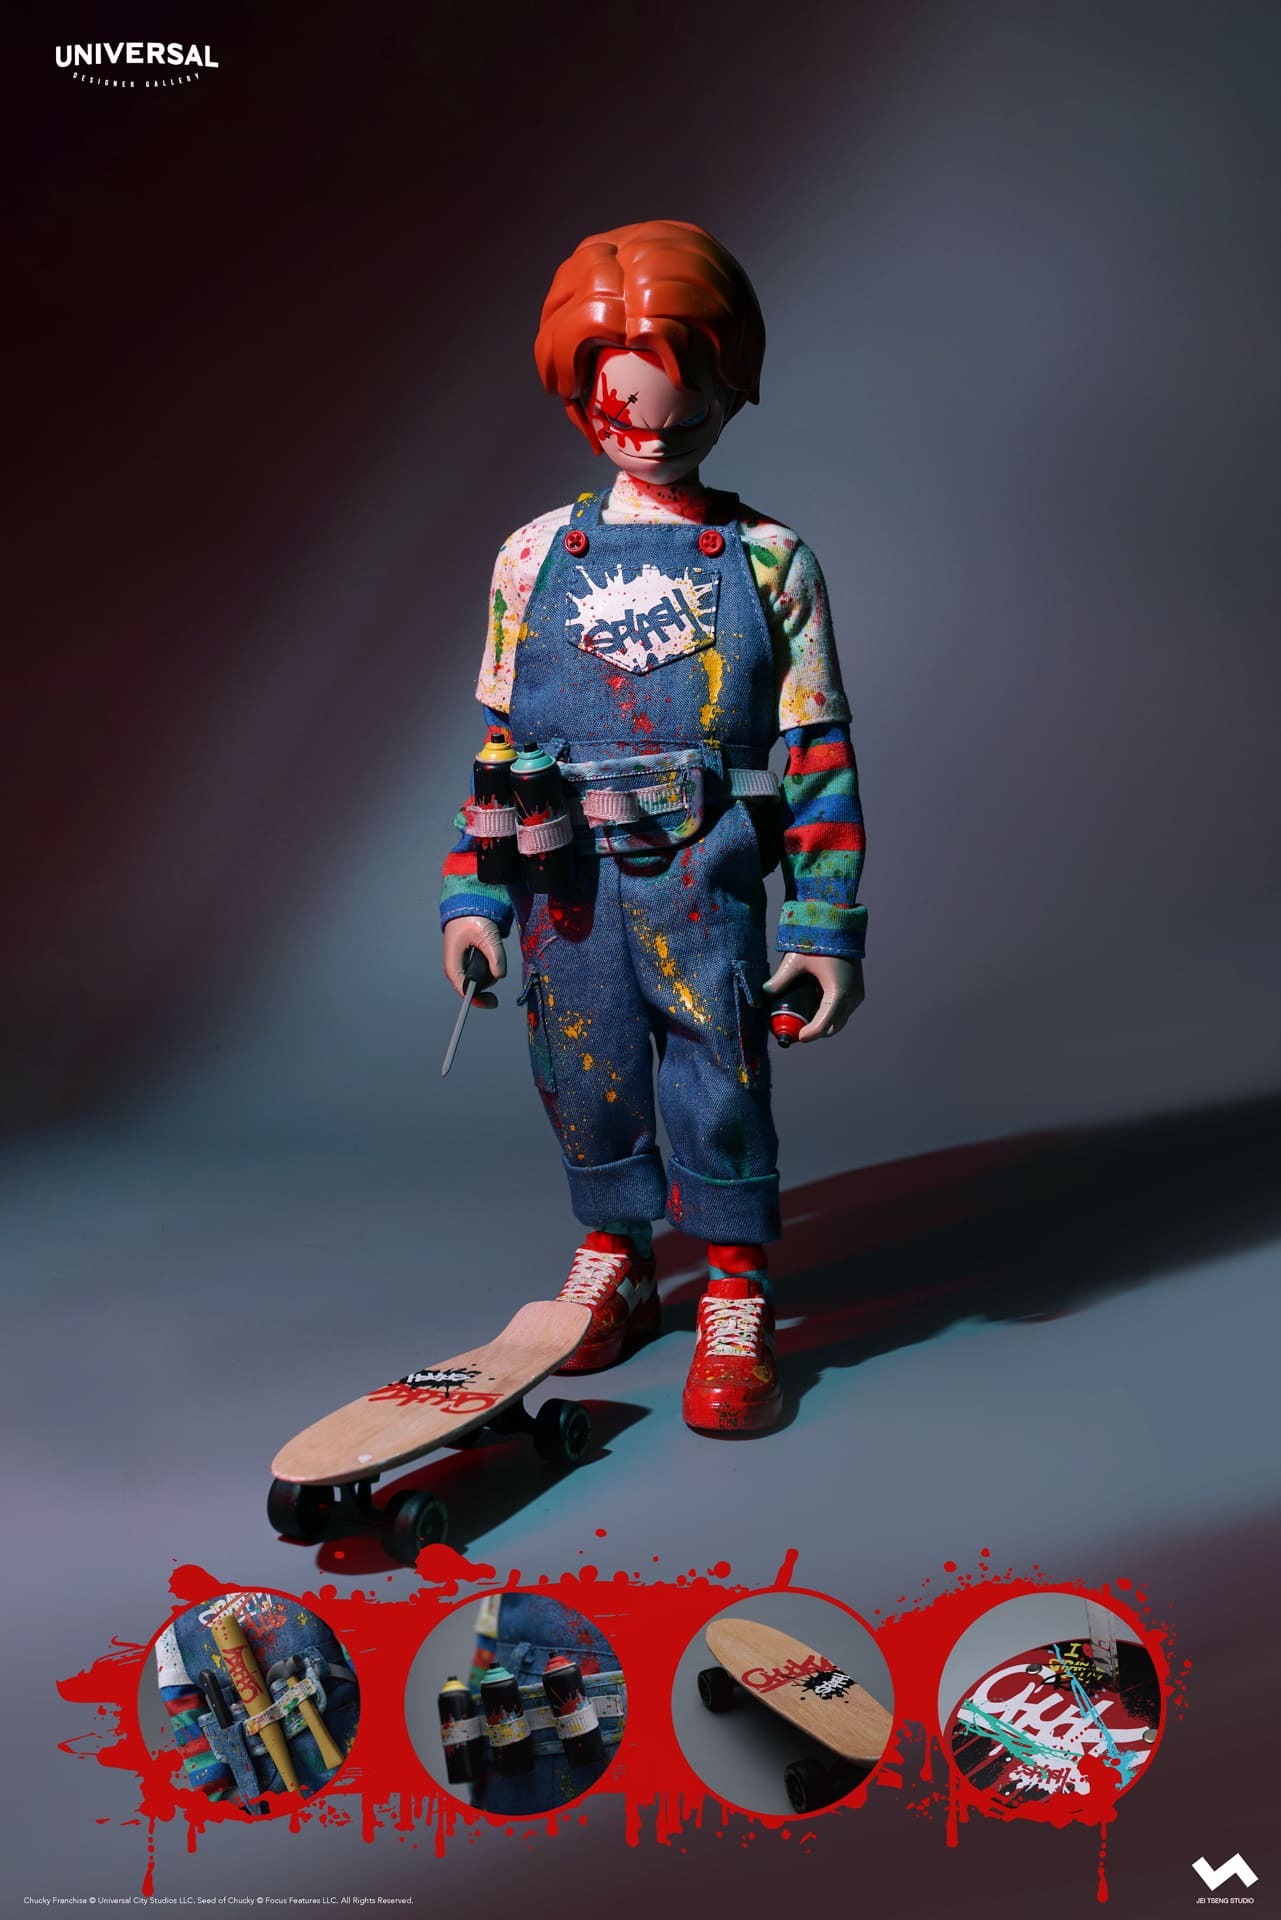 JT Studio x Universal Presents Child's Play CHUCKY - The Toy Chronicle